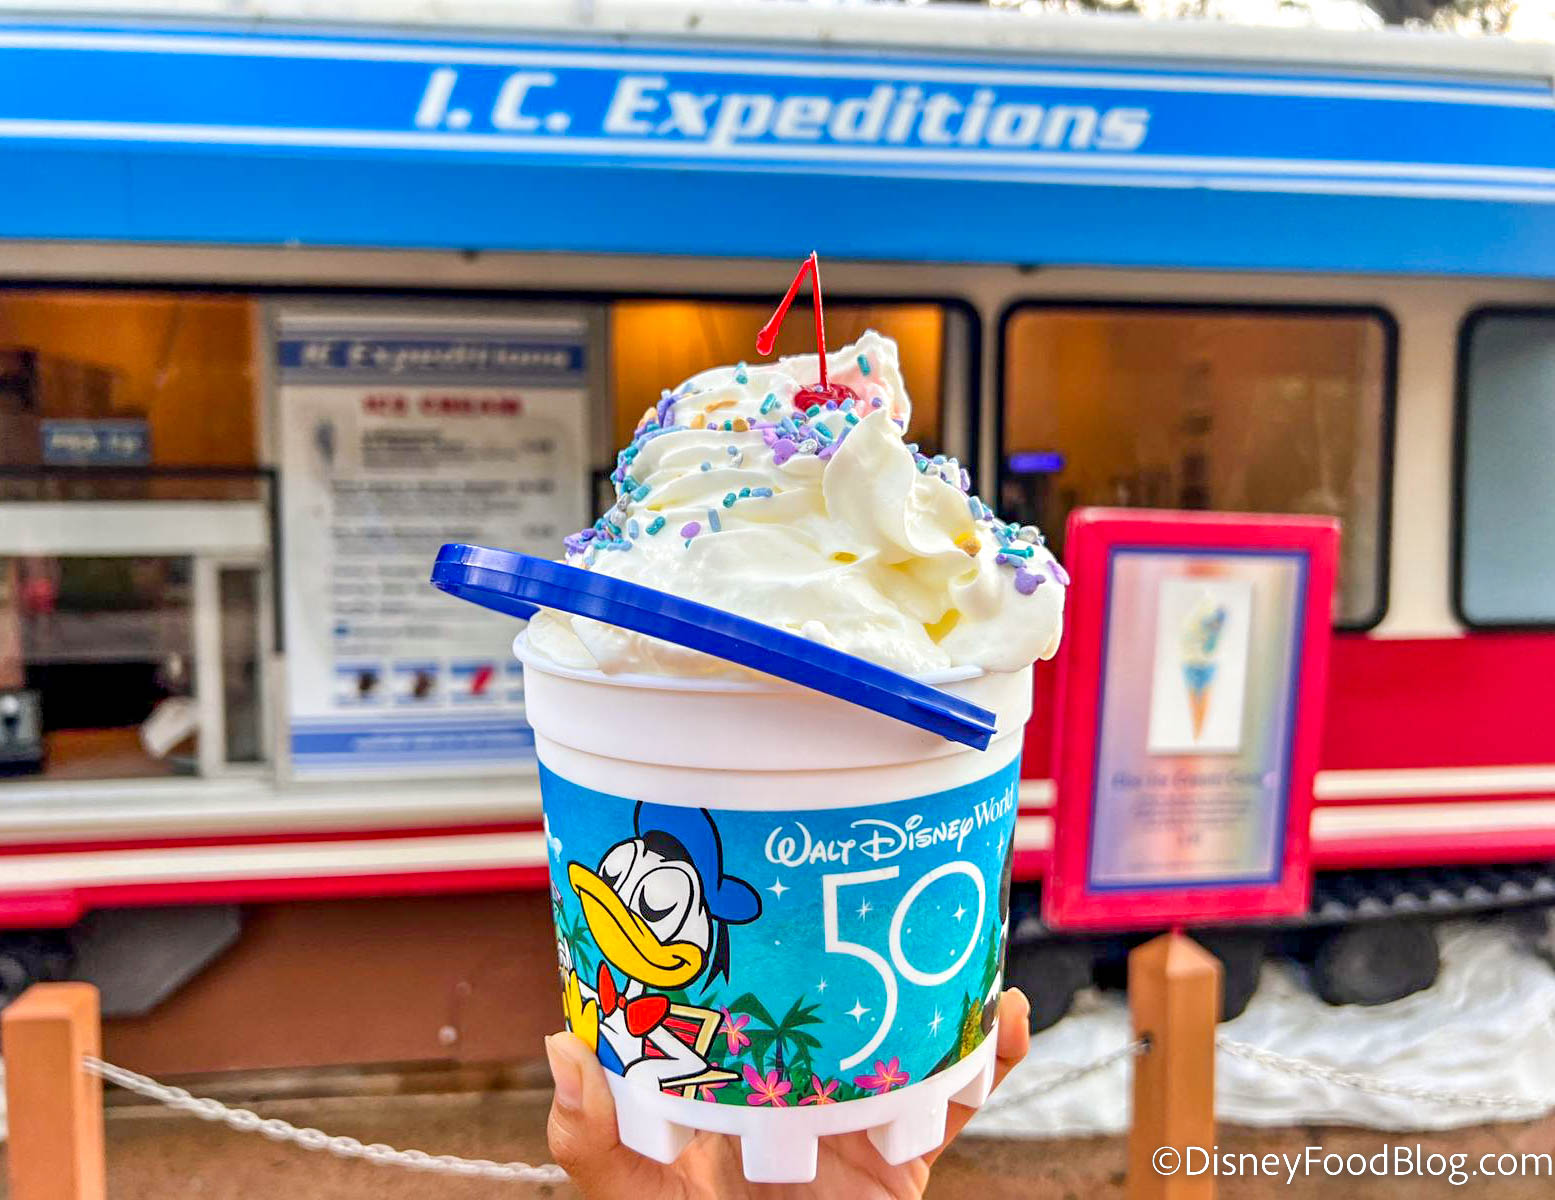 REVIEW: The BUCKET Full of Ice Cream at Disney's Blizzard Beach Water Park